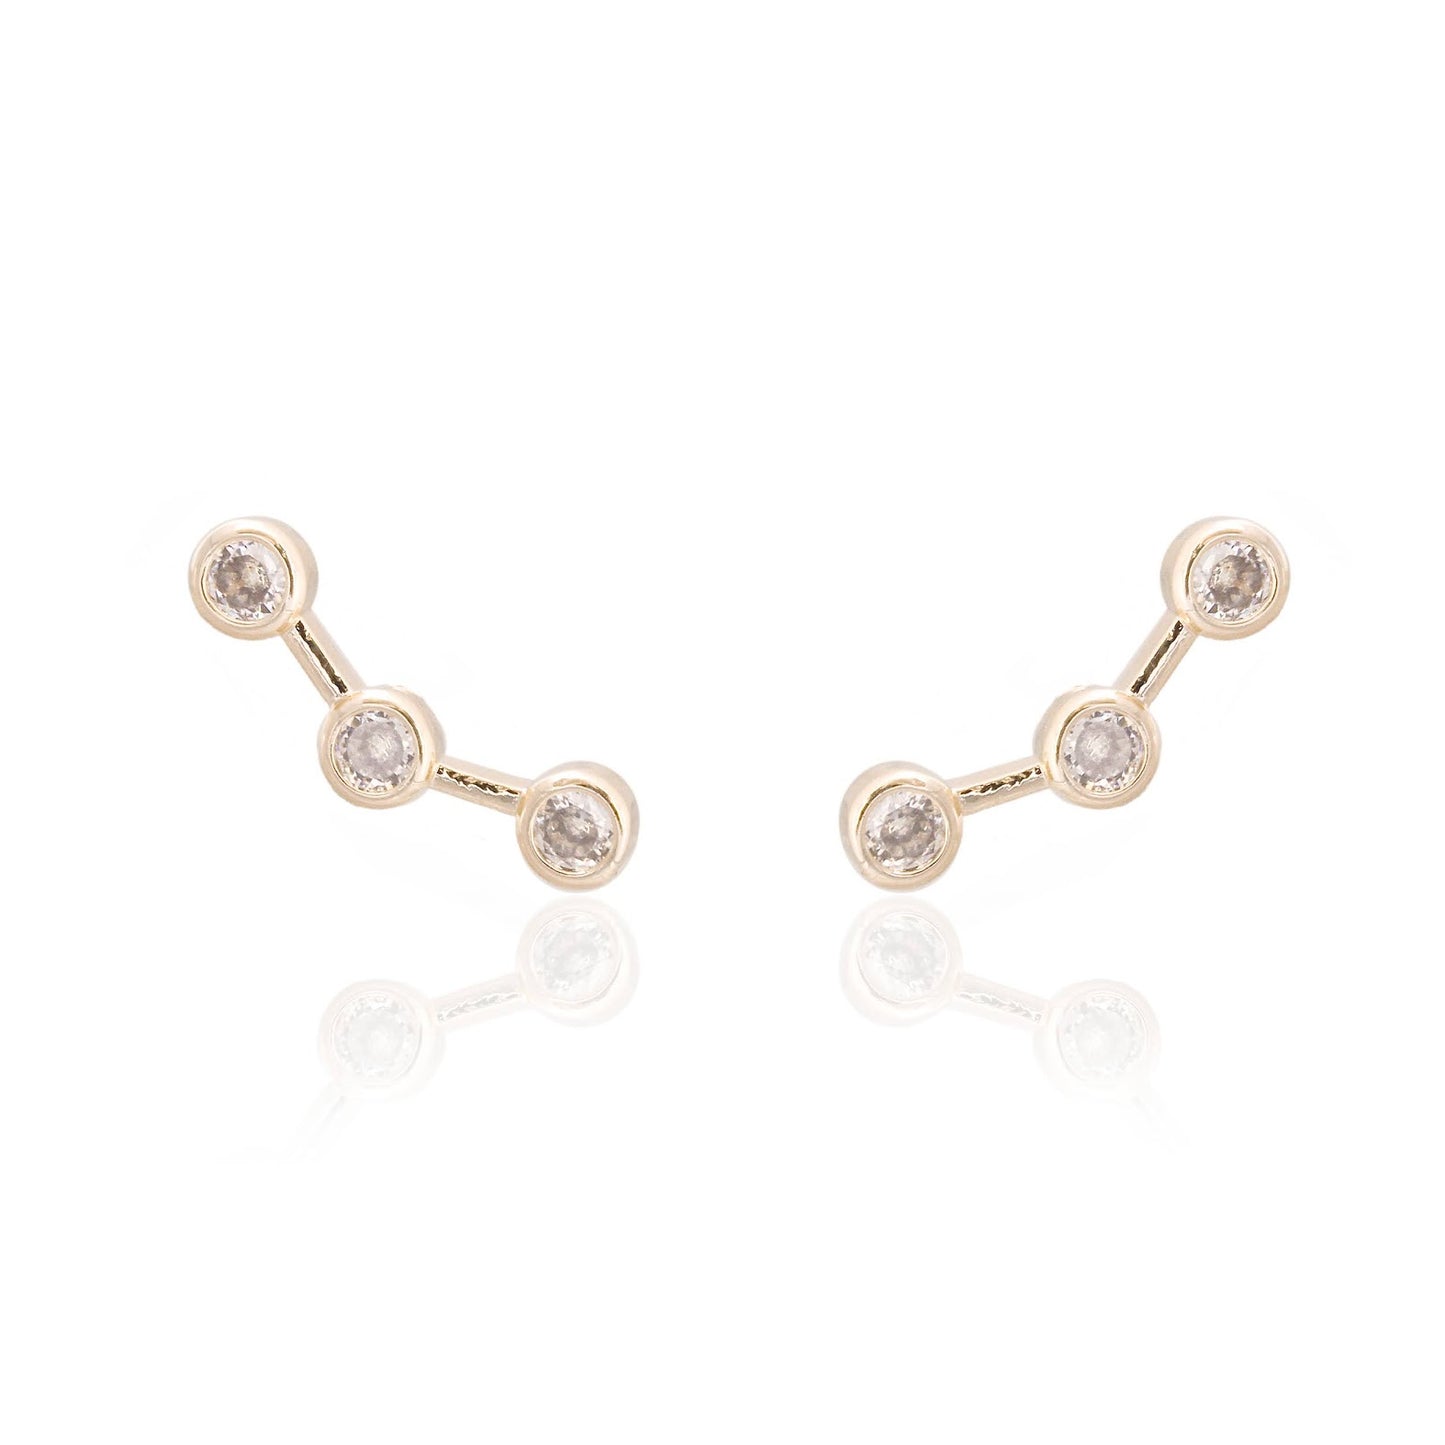 Earrings with 3 zirconia 18k gold plated